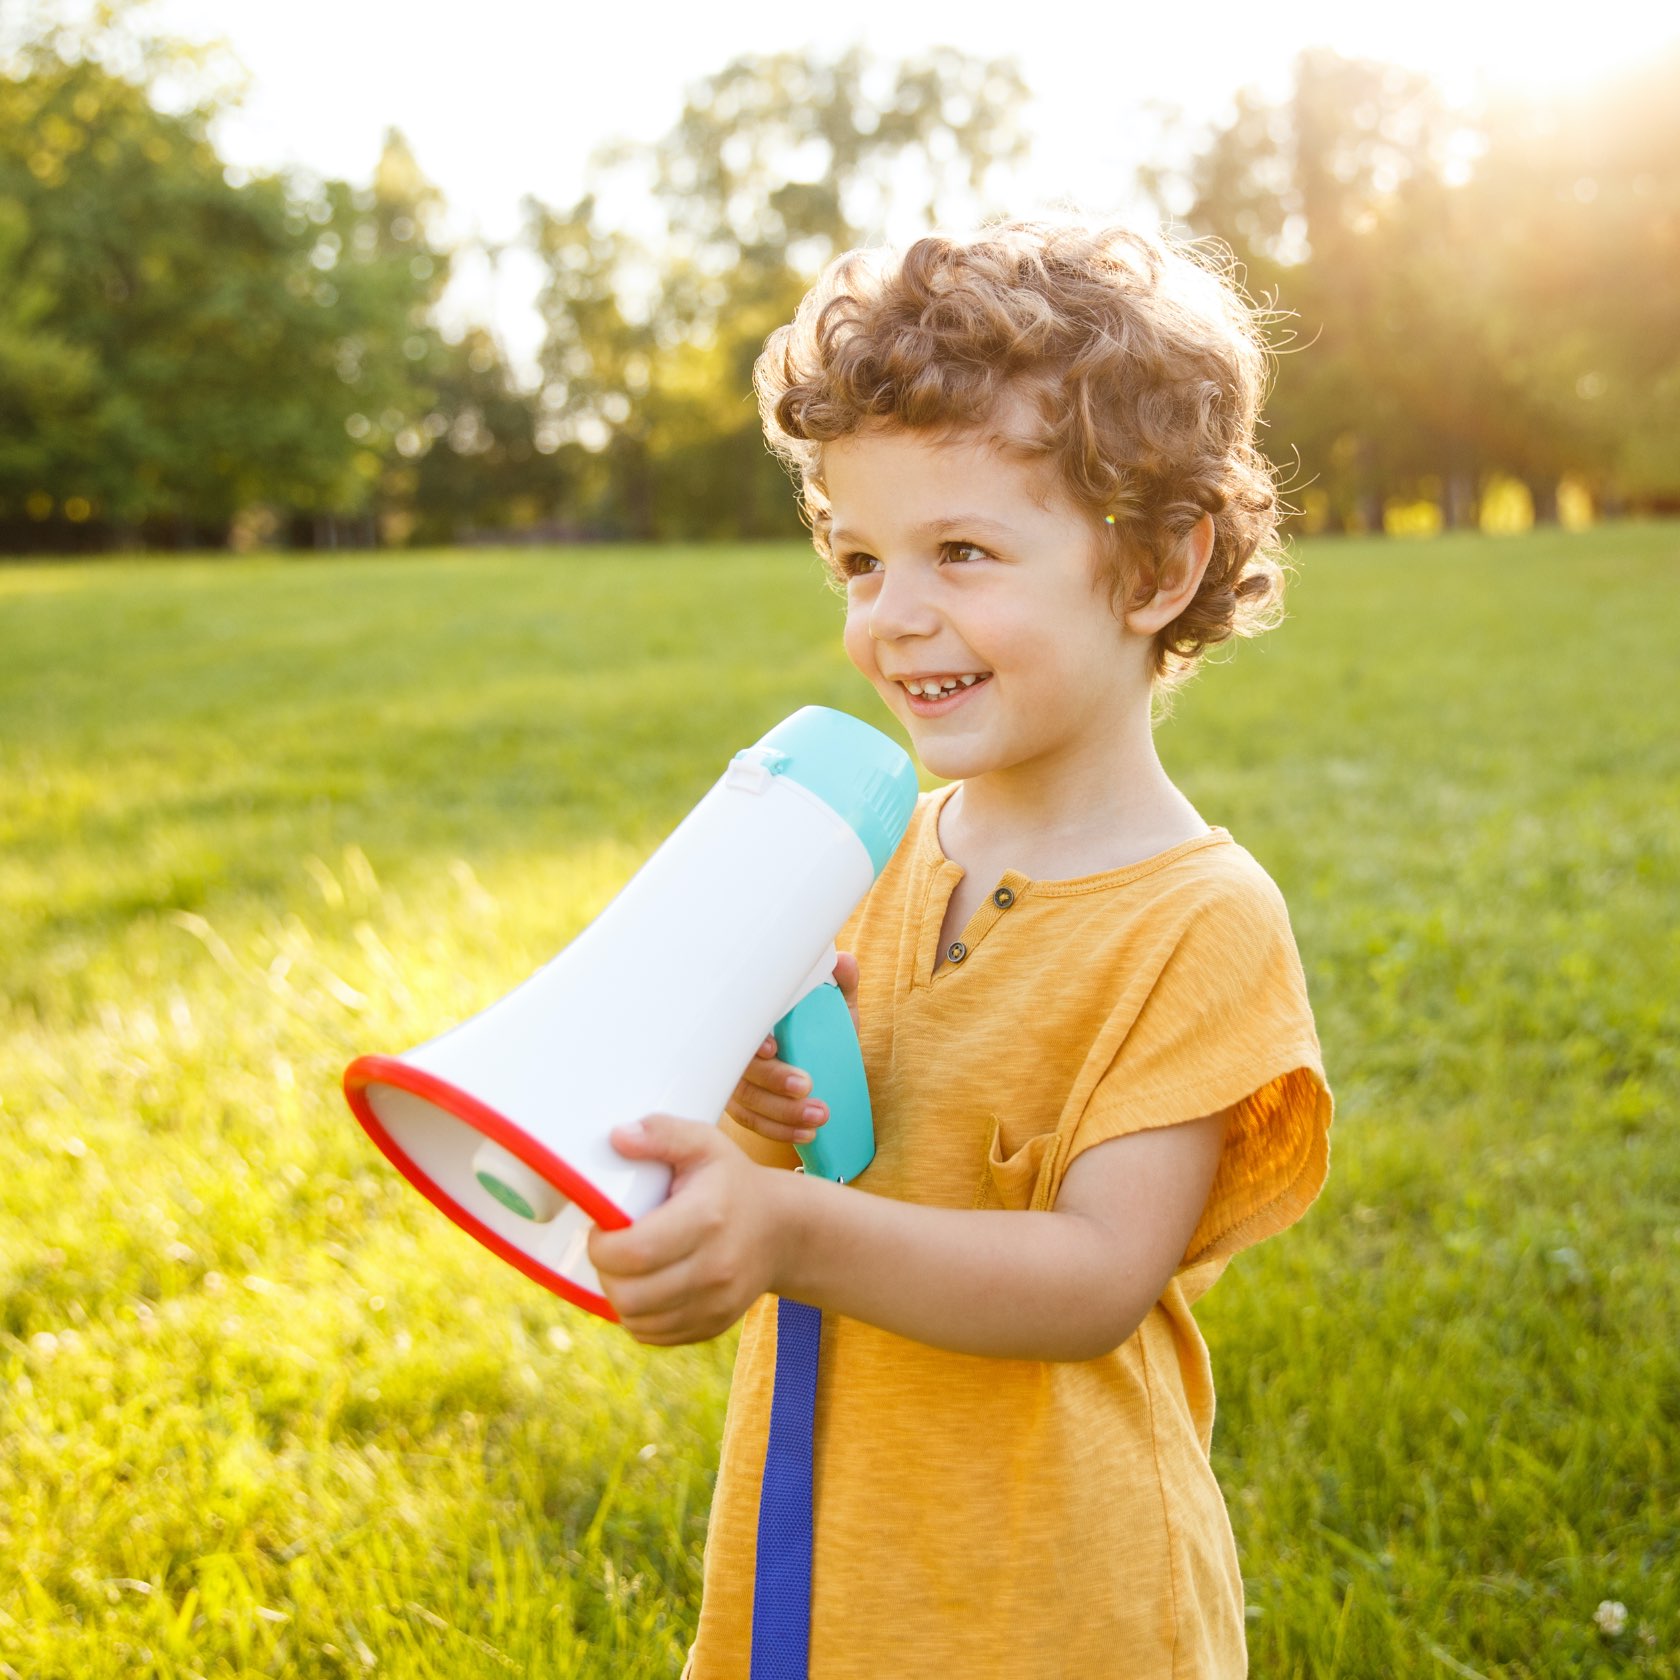 Young child with megaphone, standing outside